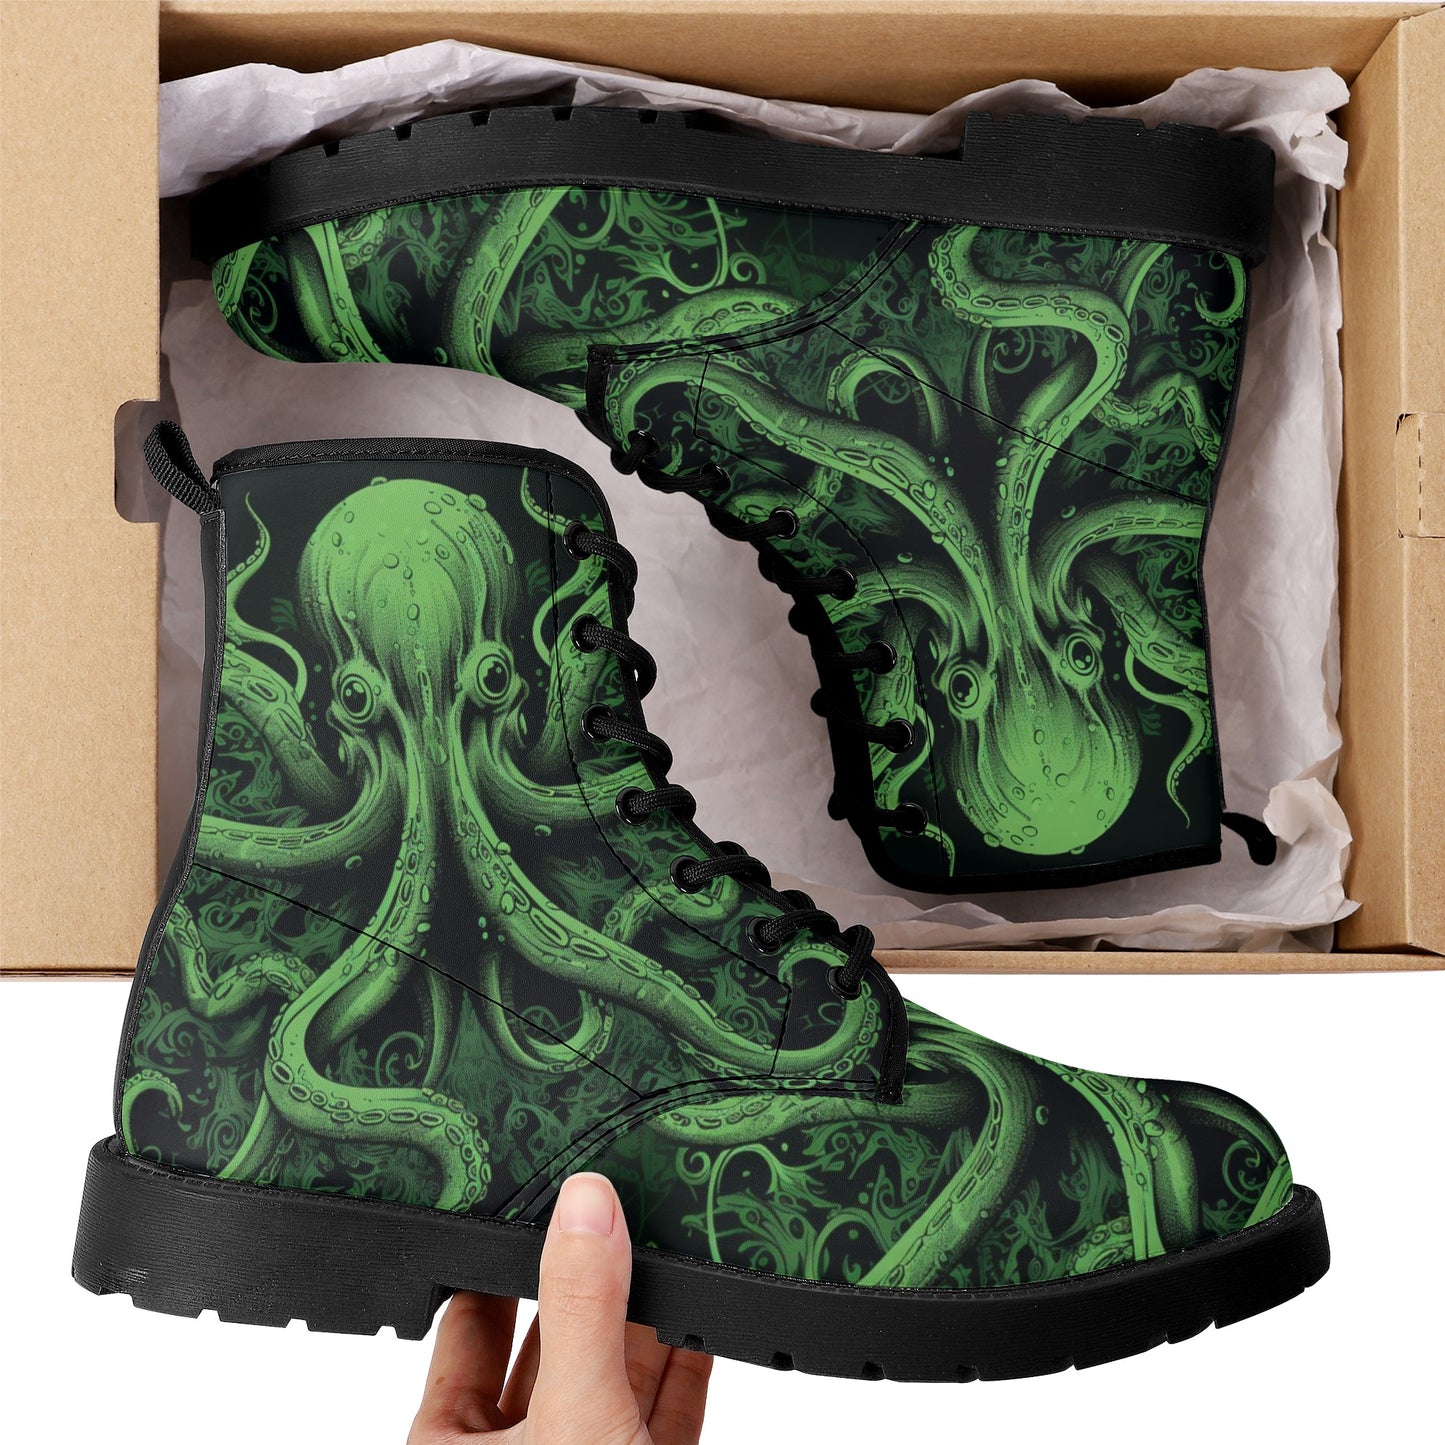 Octopus Men Leather Boots, Tentacles Green Vegan Lace Up Shoes Hiking Festival Black Ankle Combat Work Winter Waterproof Custom Gift Starcove Fashion